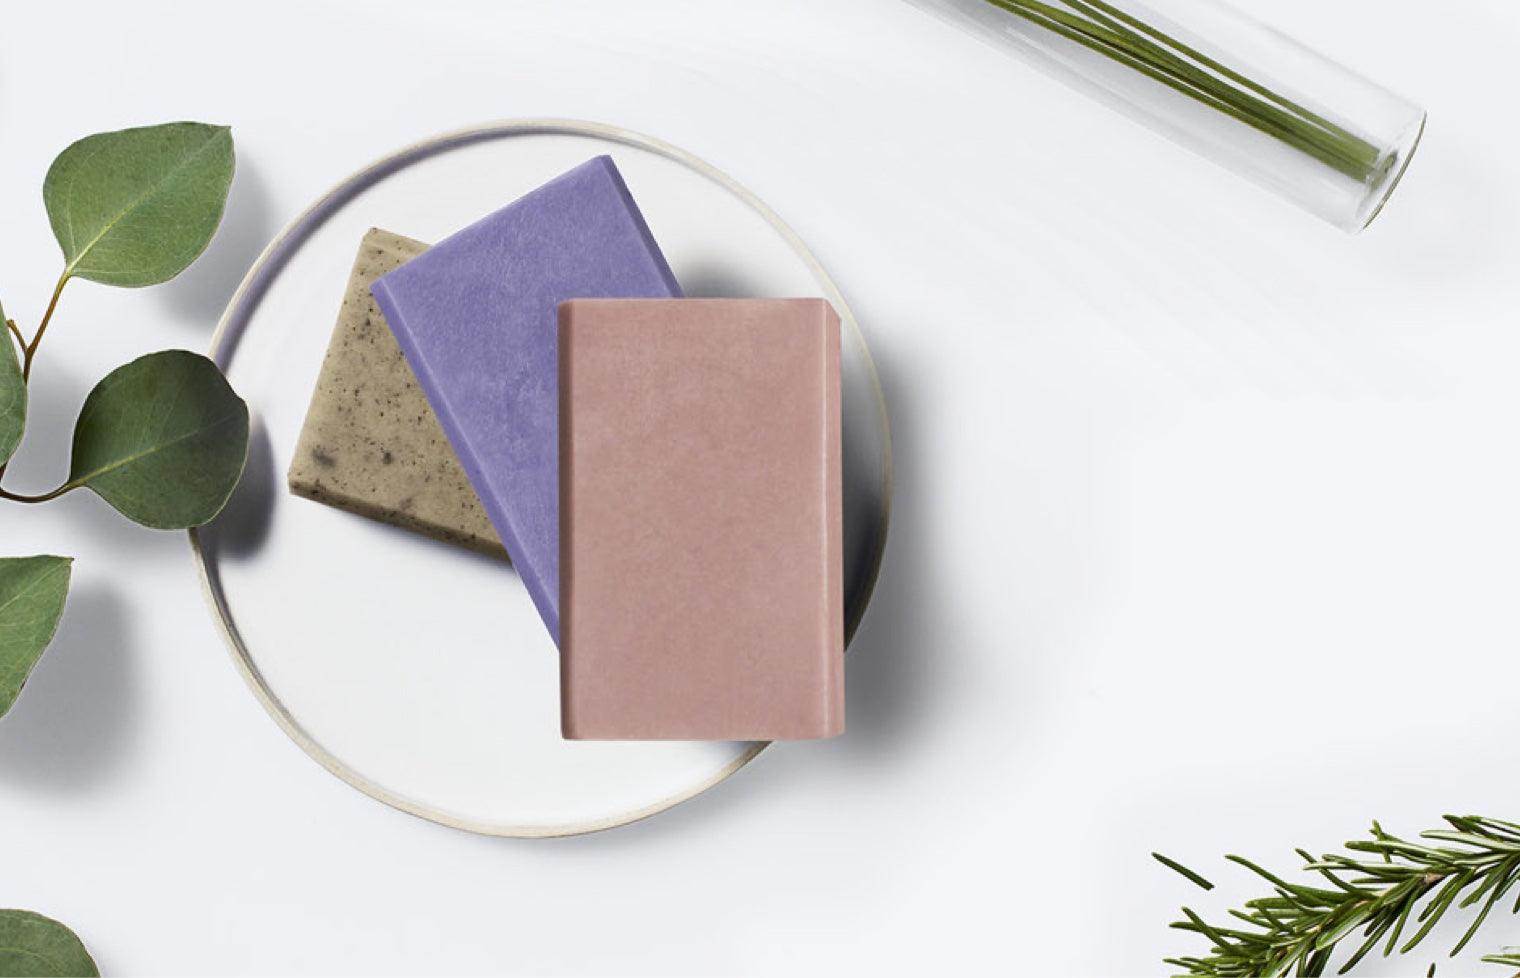 Three bars of soaps positioned on a table surrounded by herbs